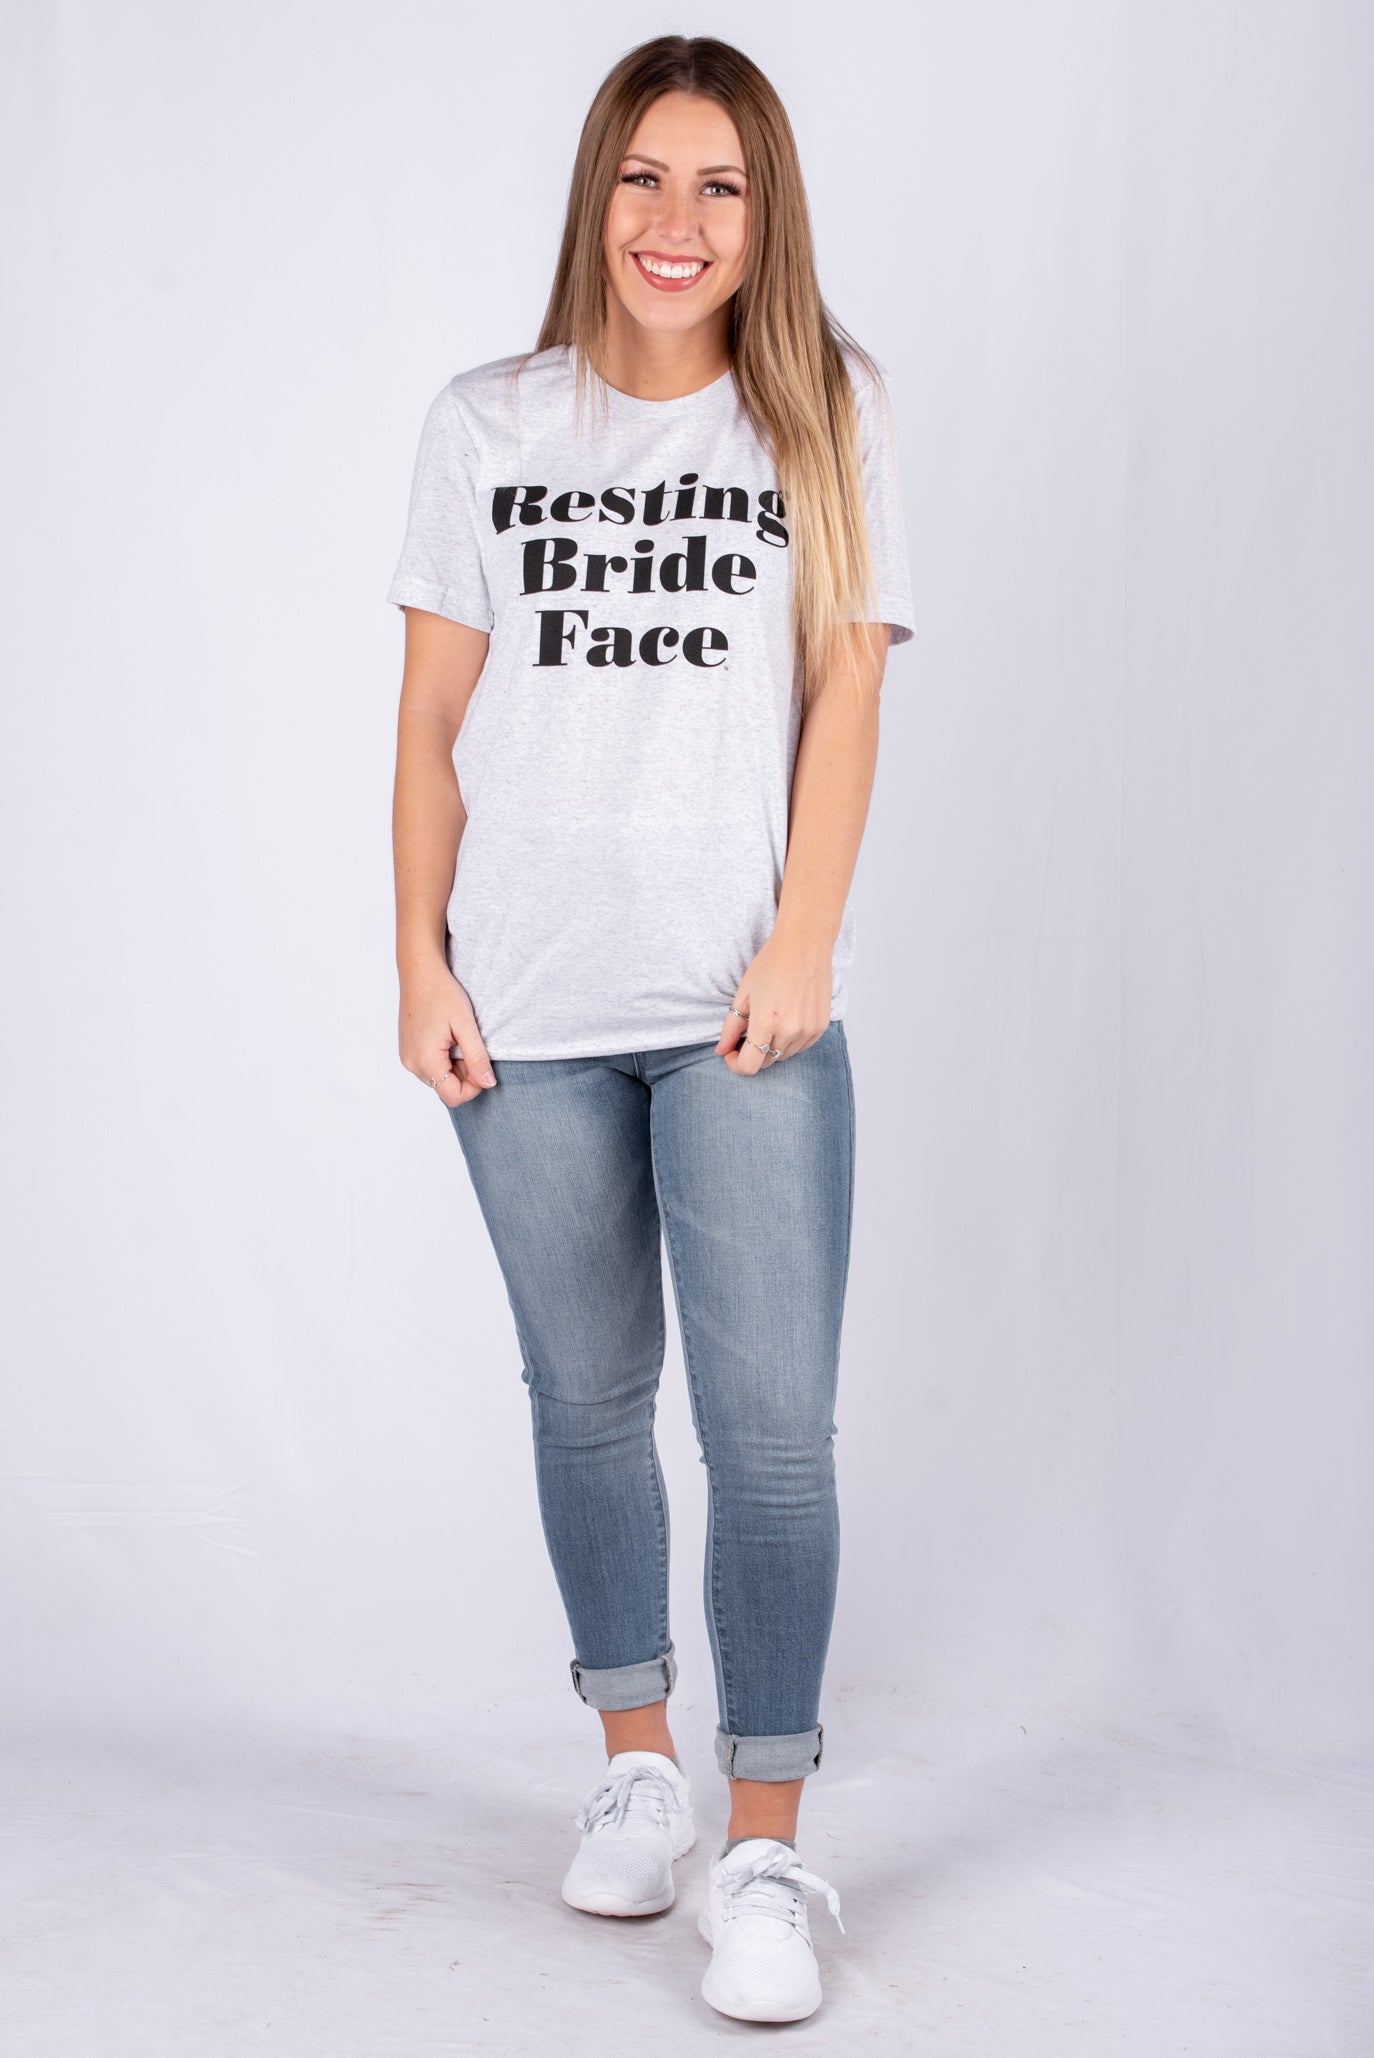 Resting bride face unisex short sleeve t-shirt white fleck - Trendy T-shirts - Cute Graphic Tee Fashion at Lush Fashion Lounge Boutique in Oklahoma